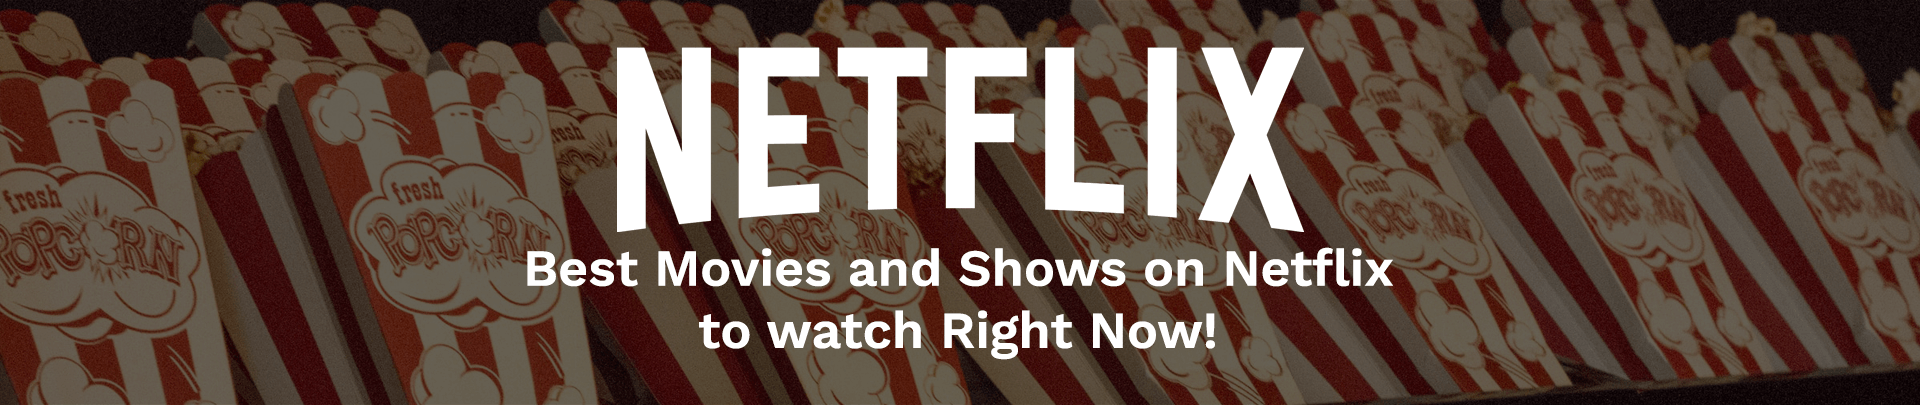 best movies and shows on netflix